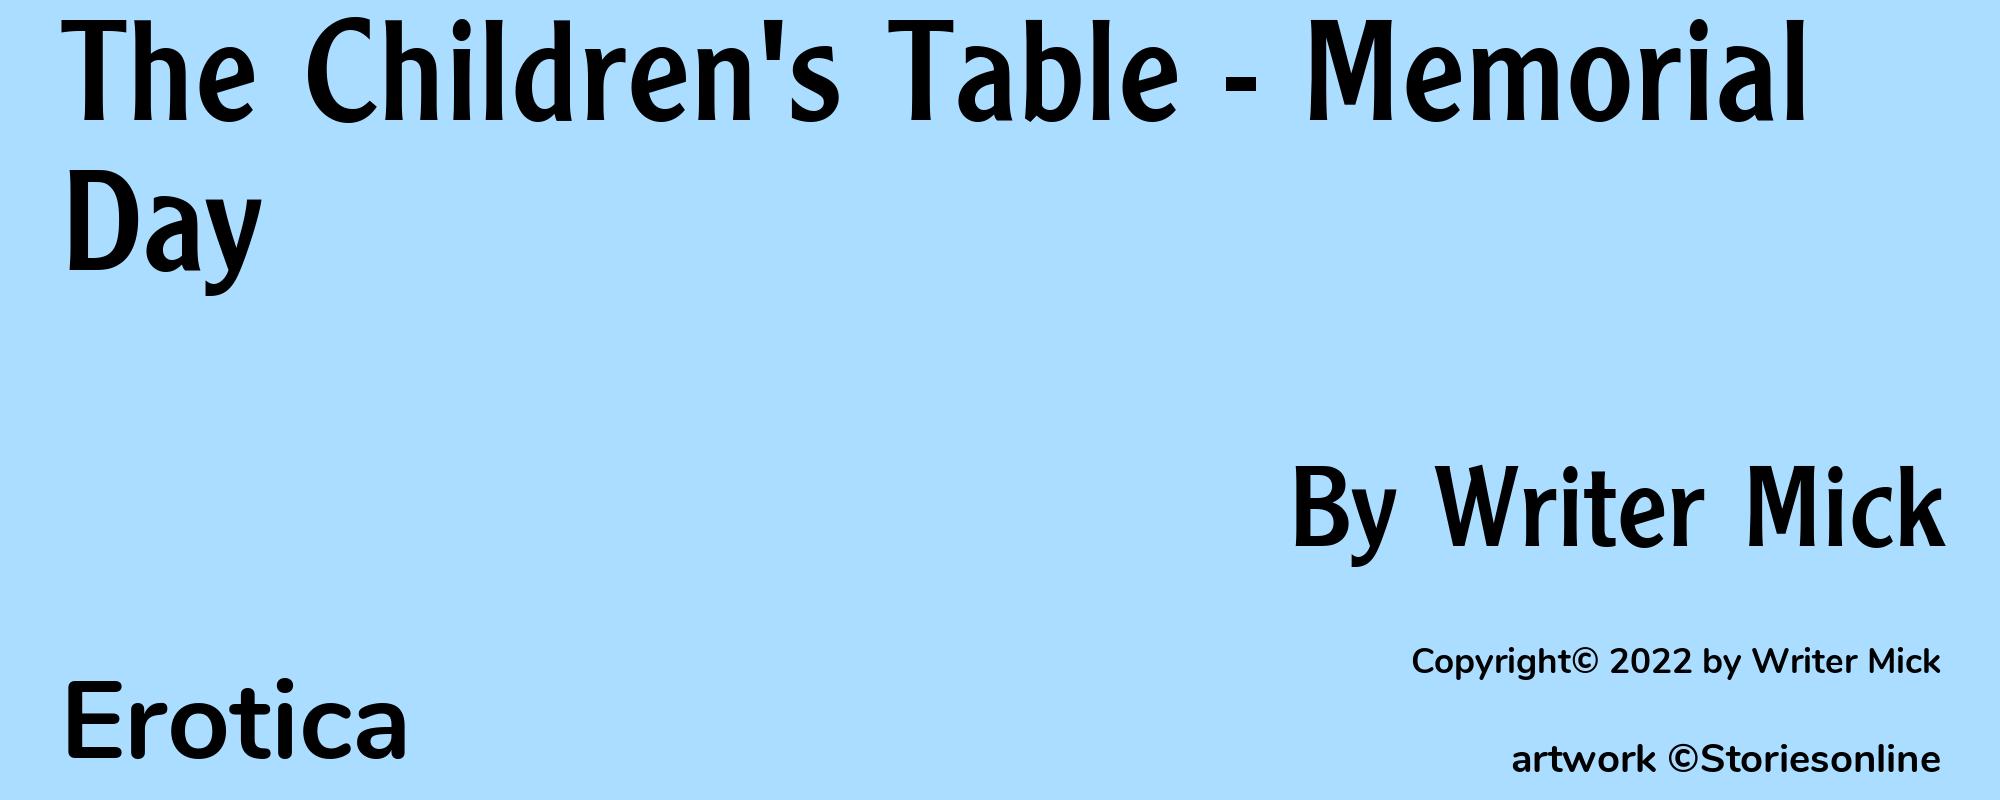 The Children's Table - Memorial Day - Cover